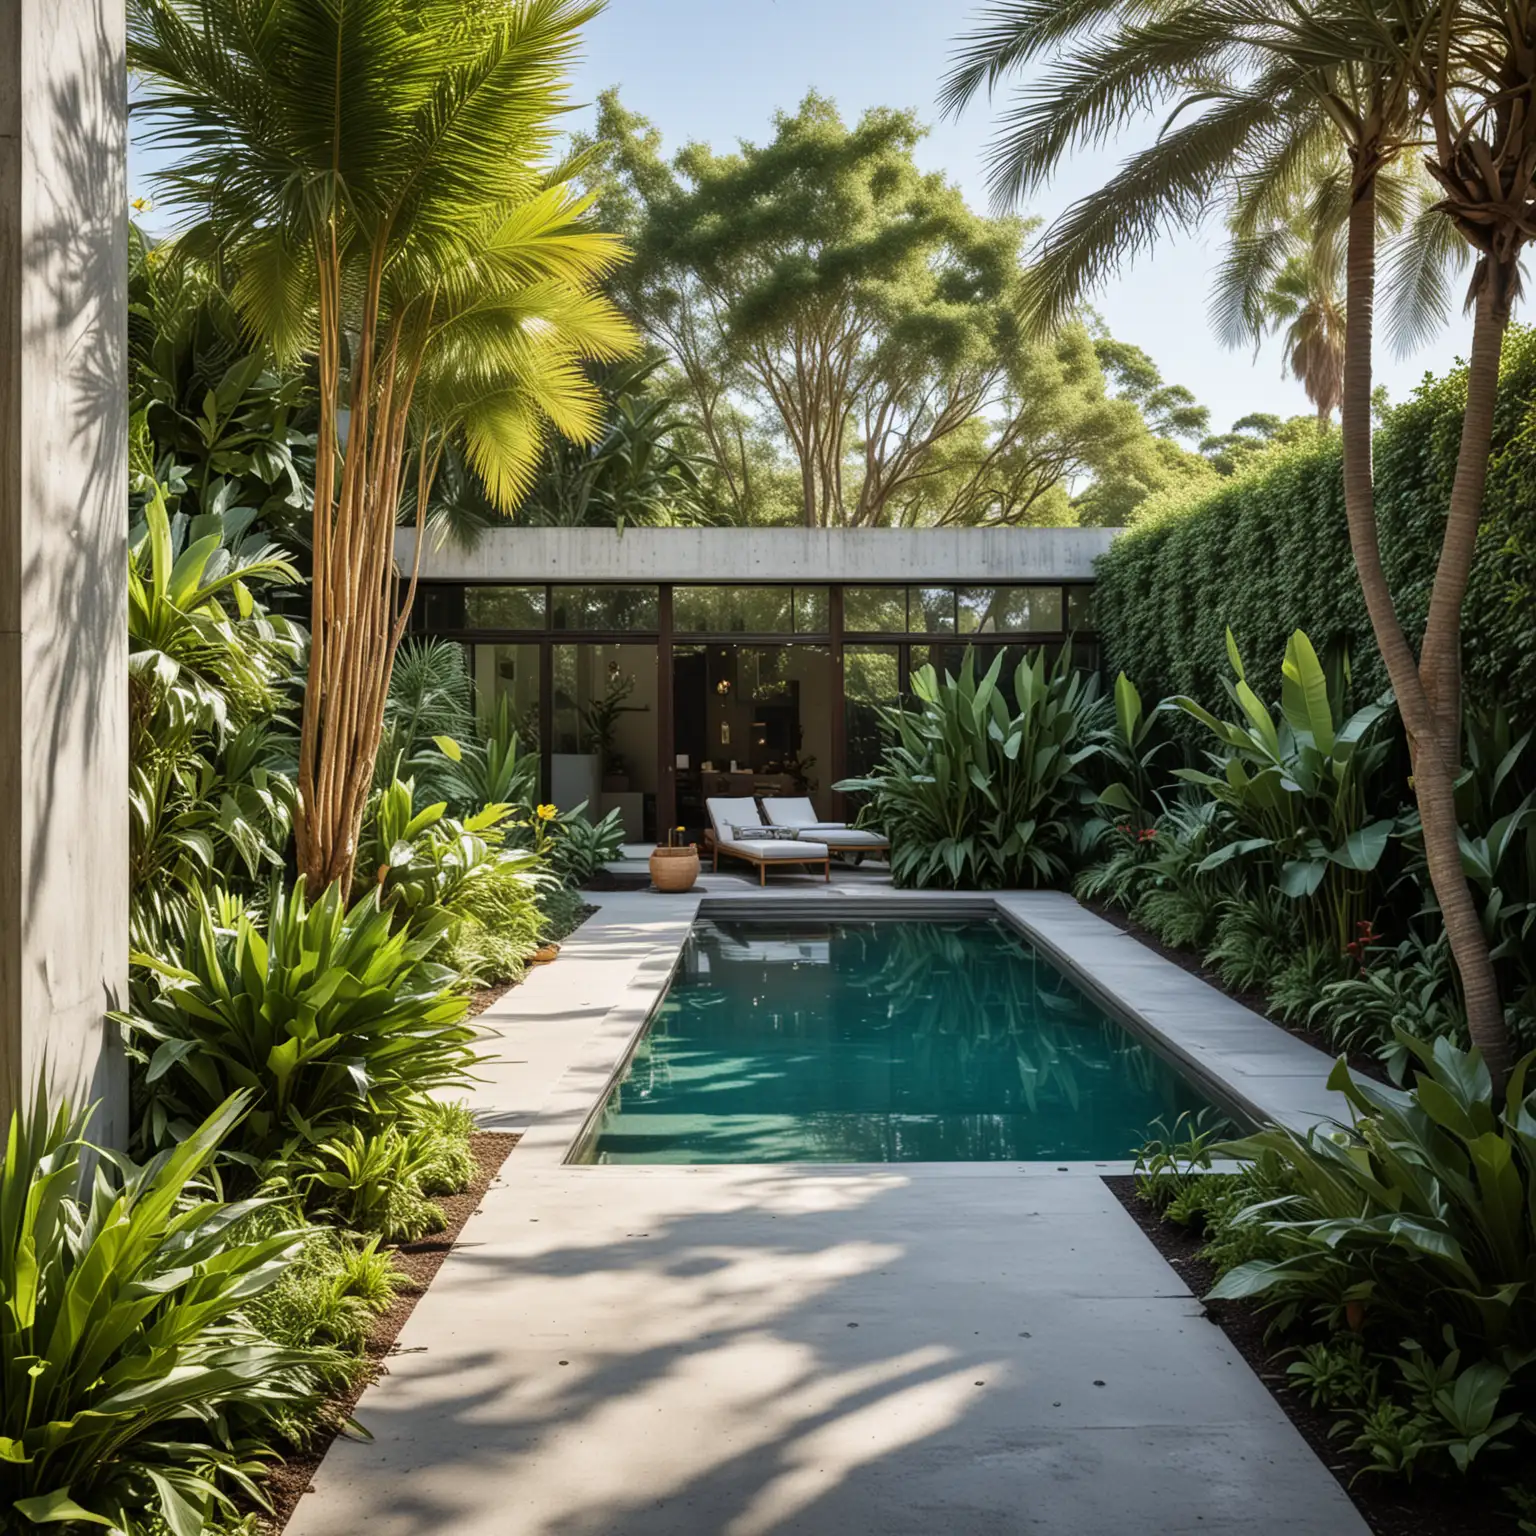 Symmetrical-Modern-Outdoor-Garden-with-Reflecting-Pool-and-Tropical-Flora